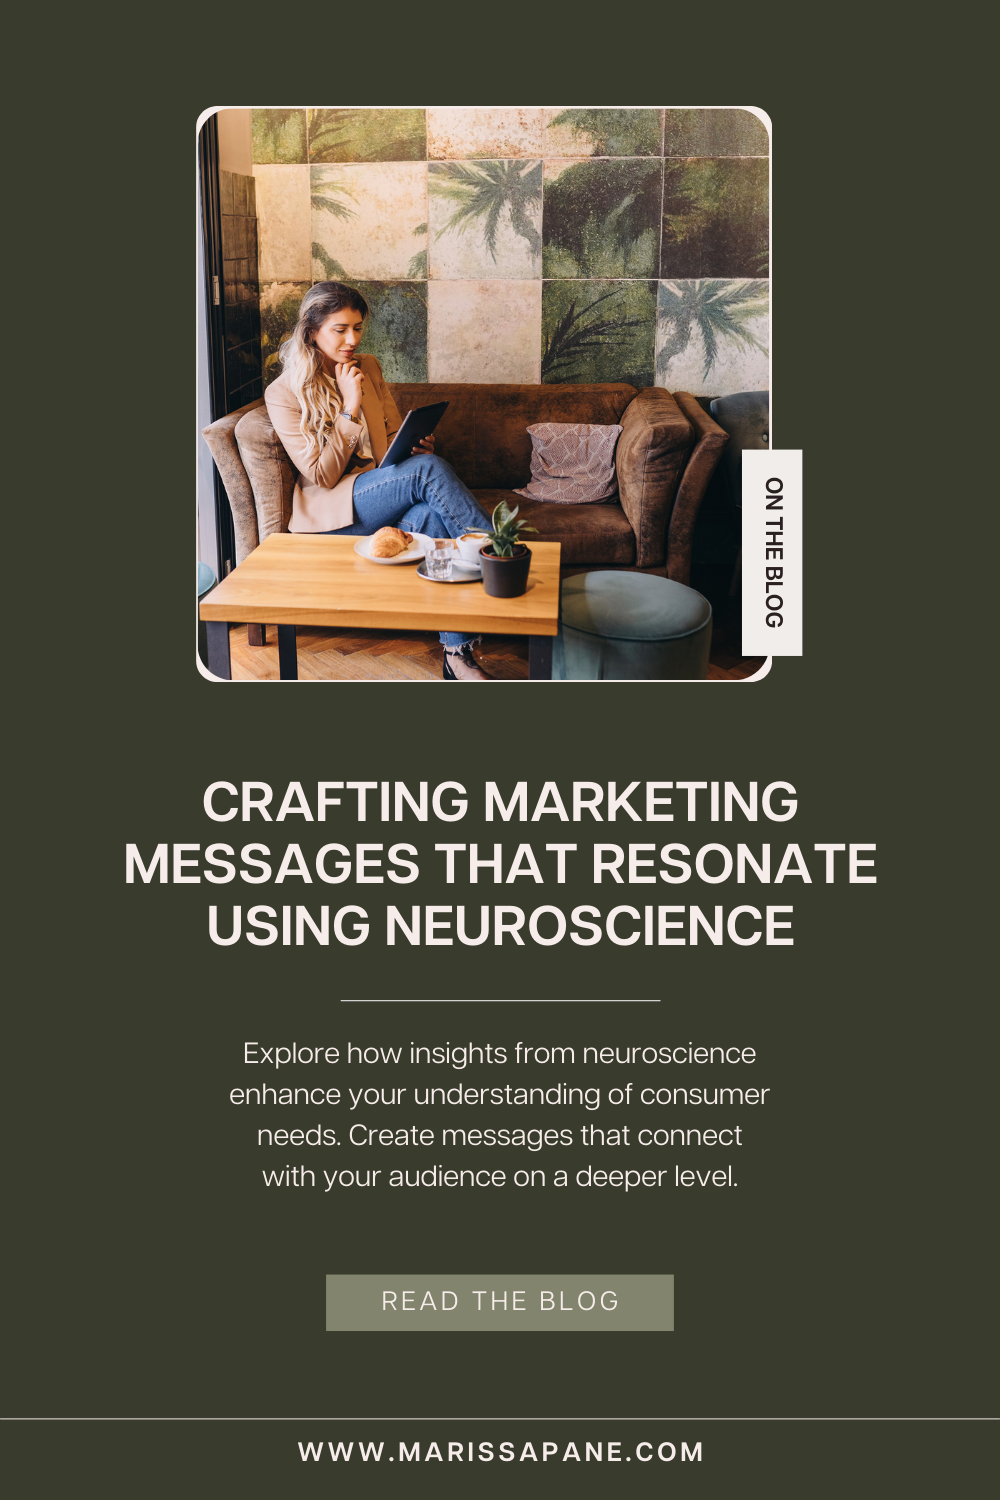 Craft Marketing Messages That Resonate Using Neuroscience and Psychology